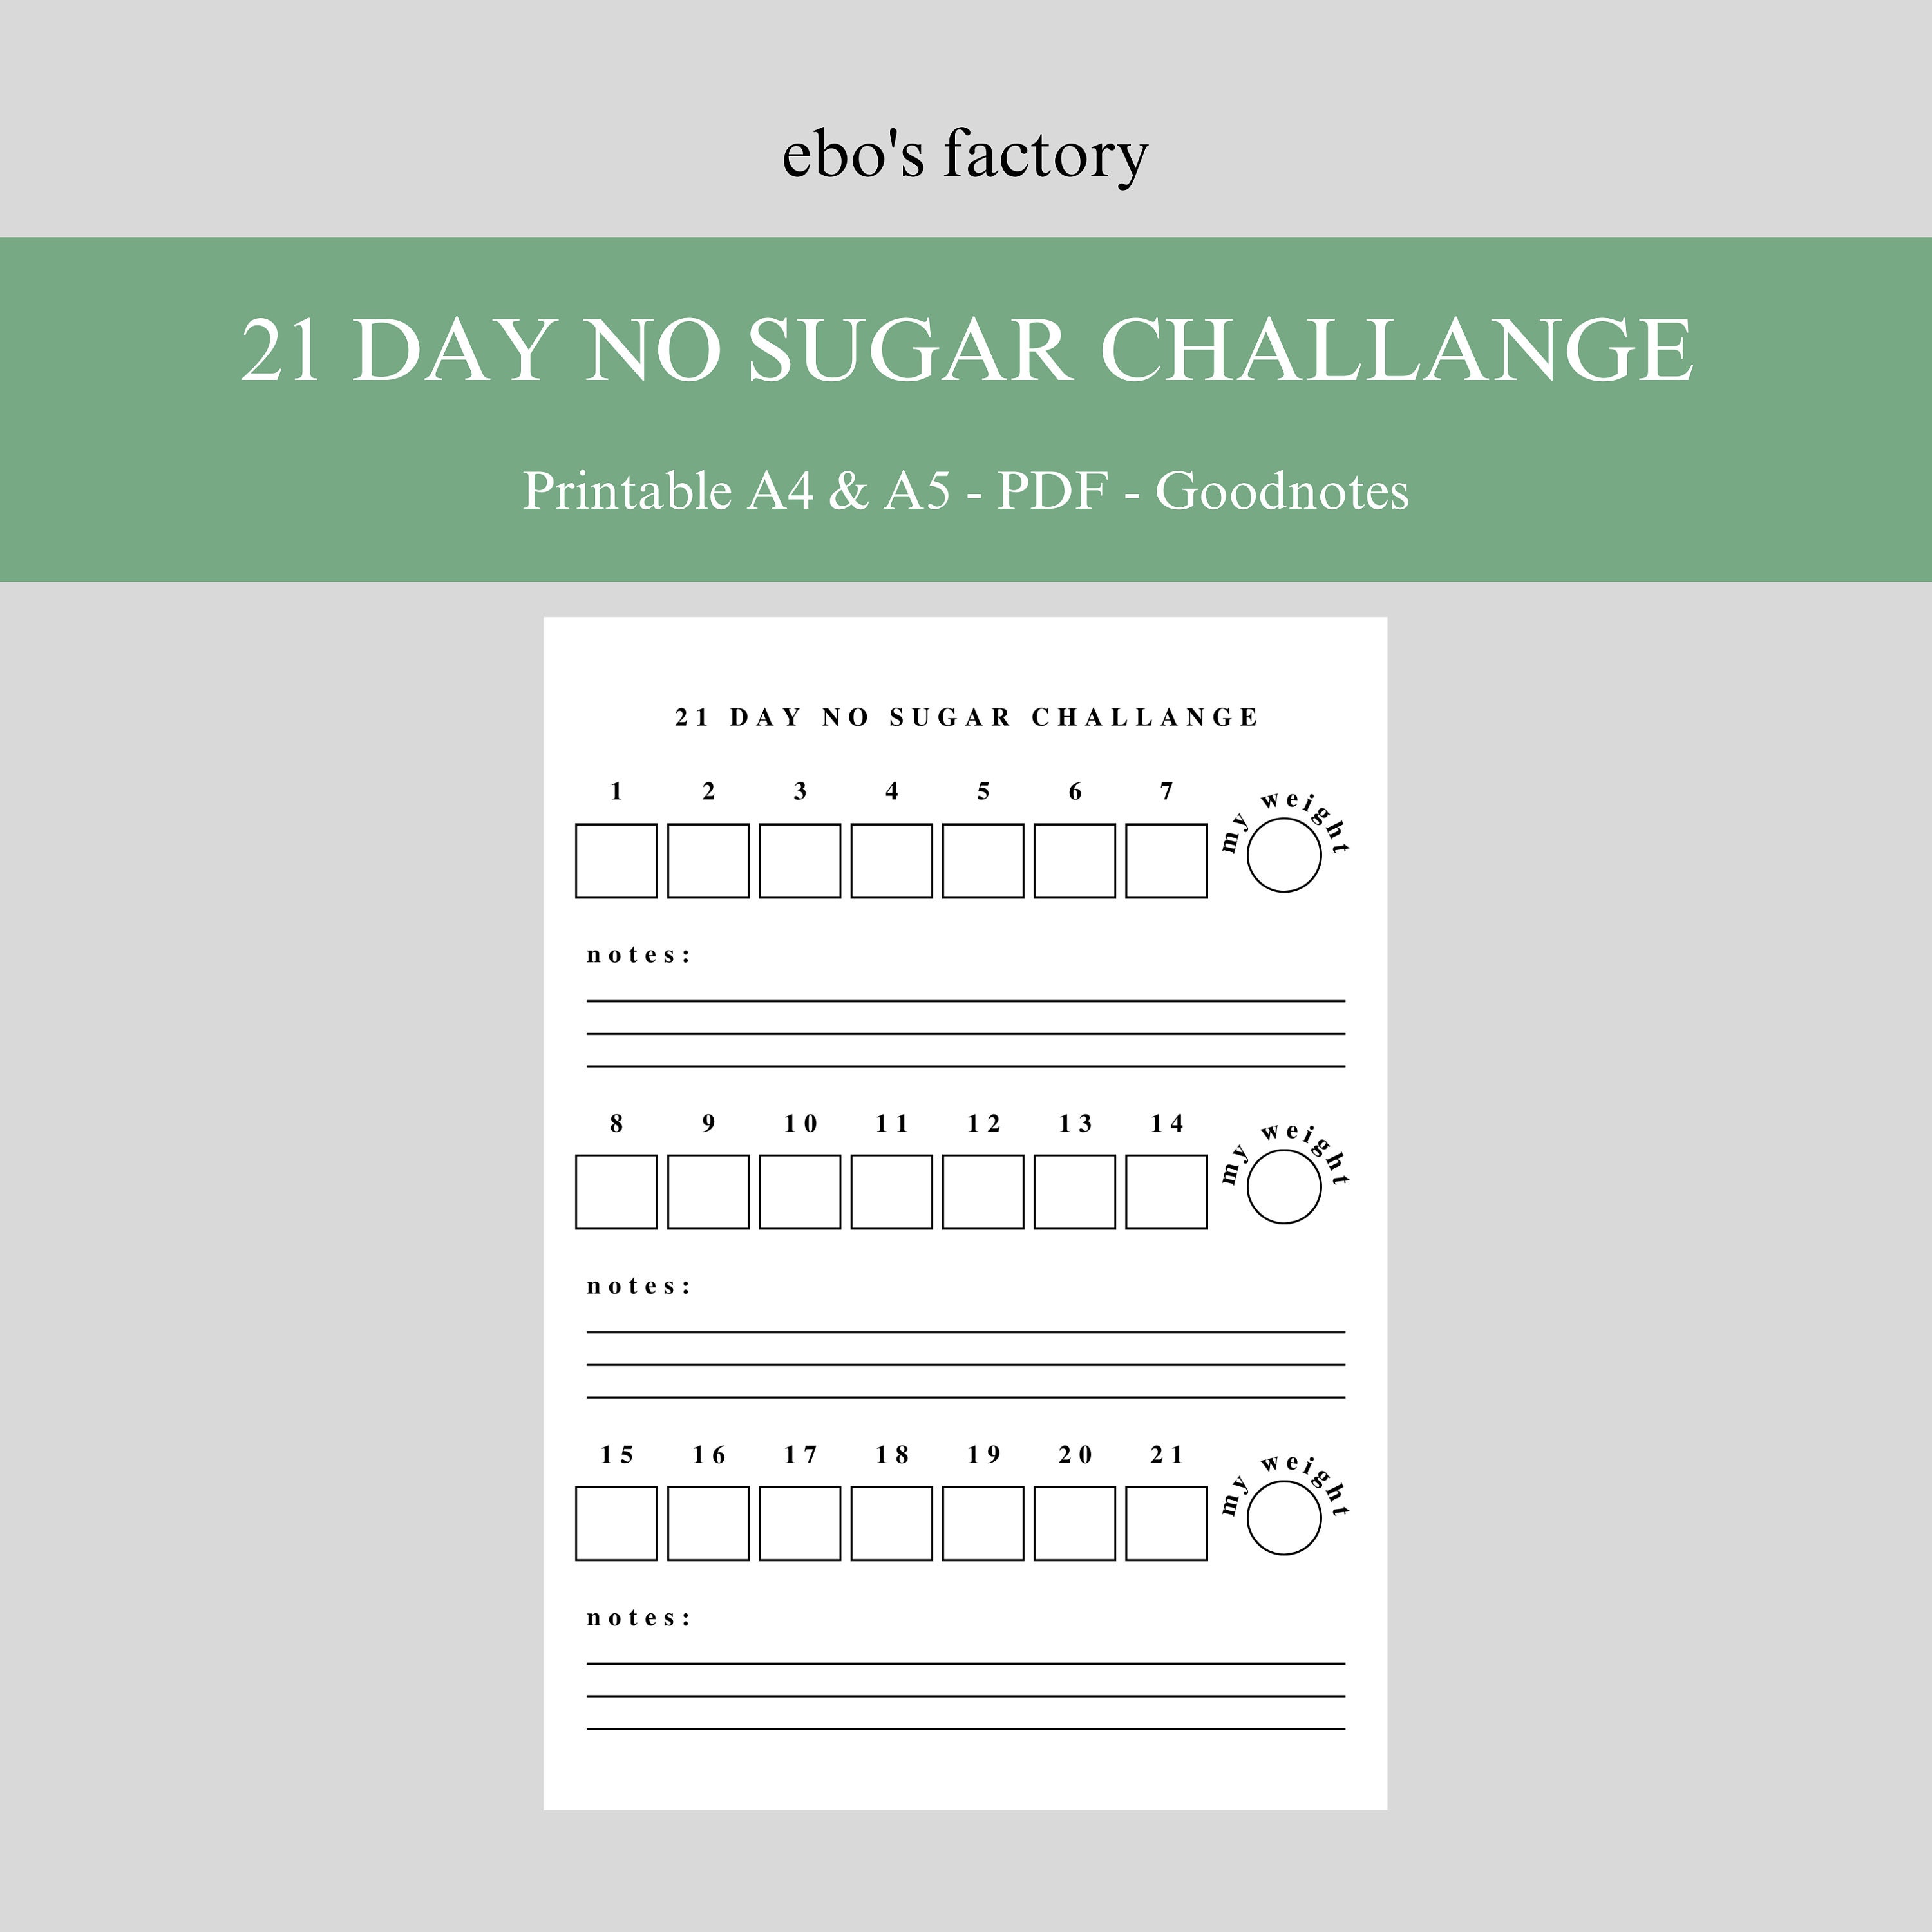 Go for No! Challenge - Double Your Sales in 21 Days